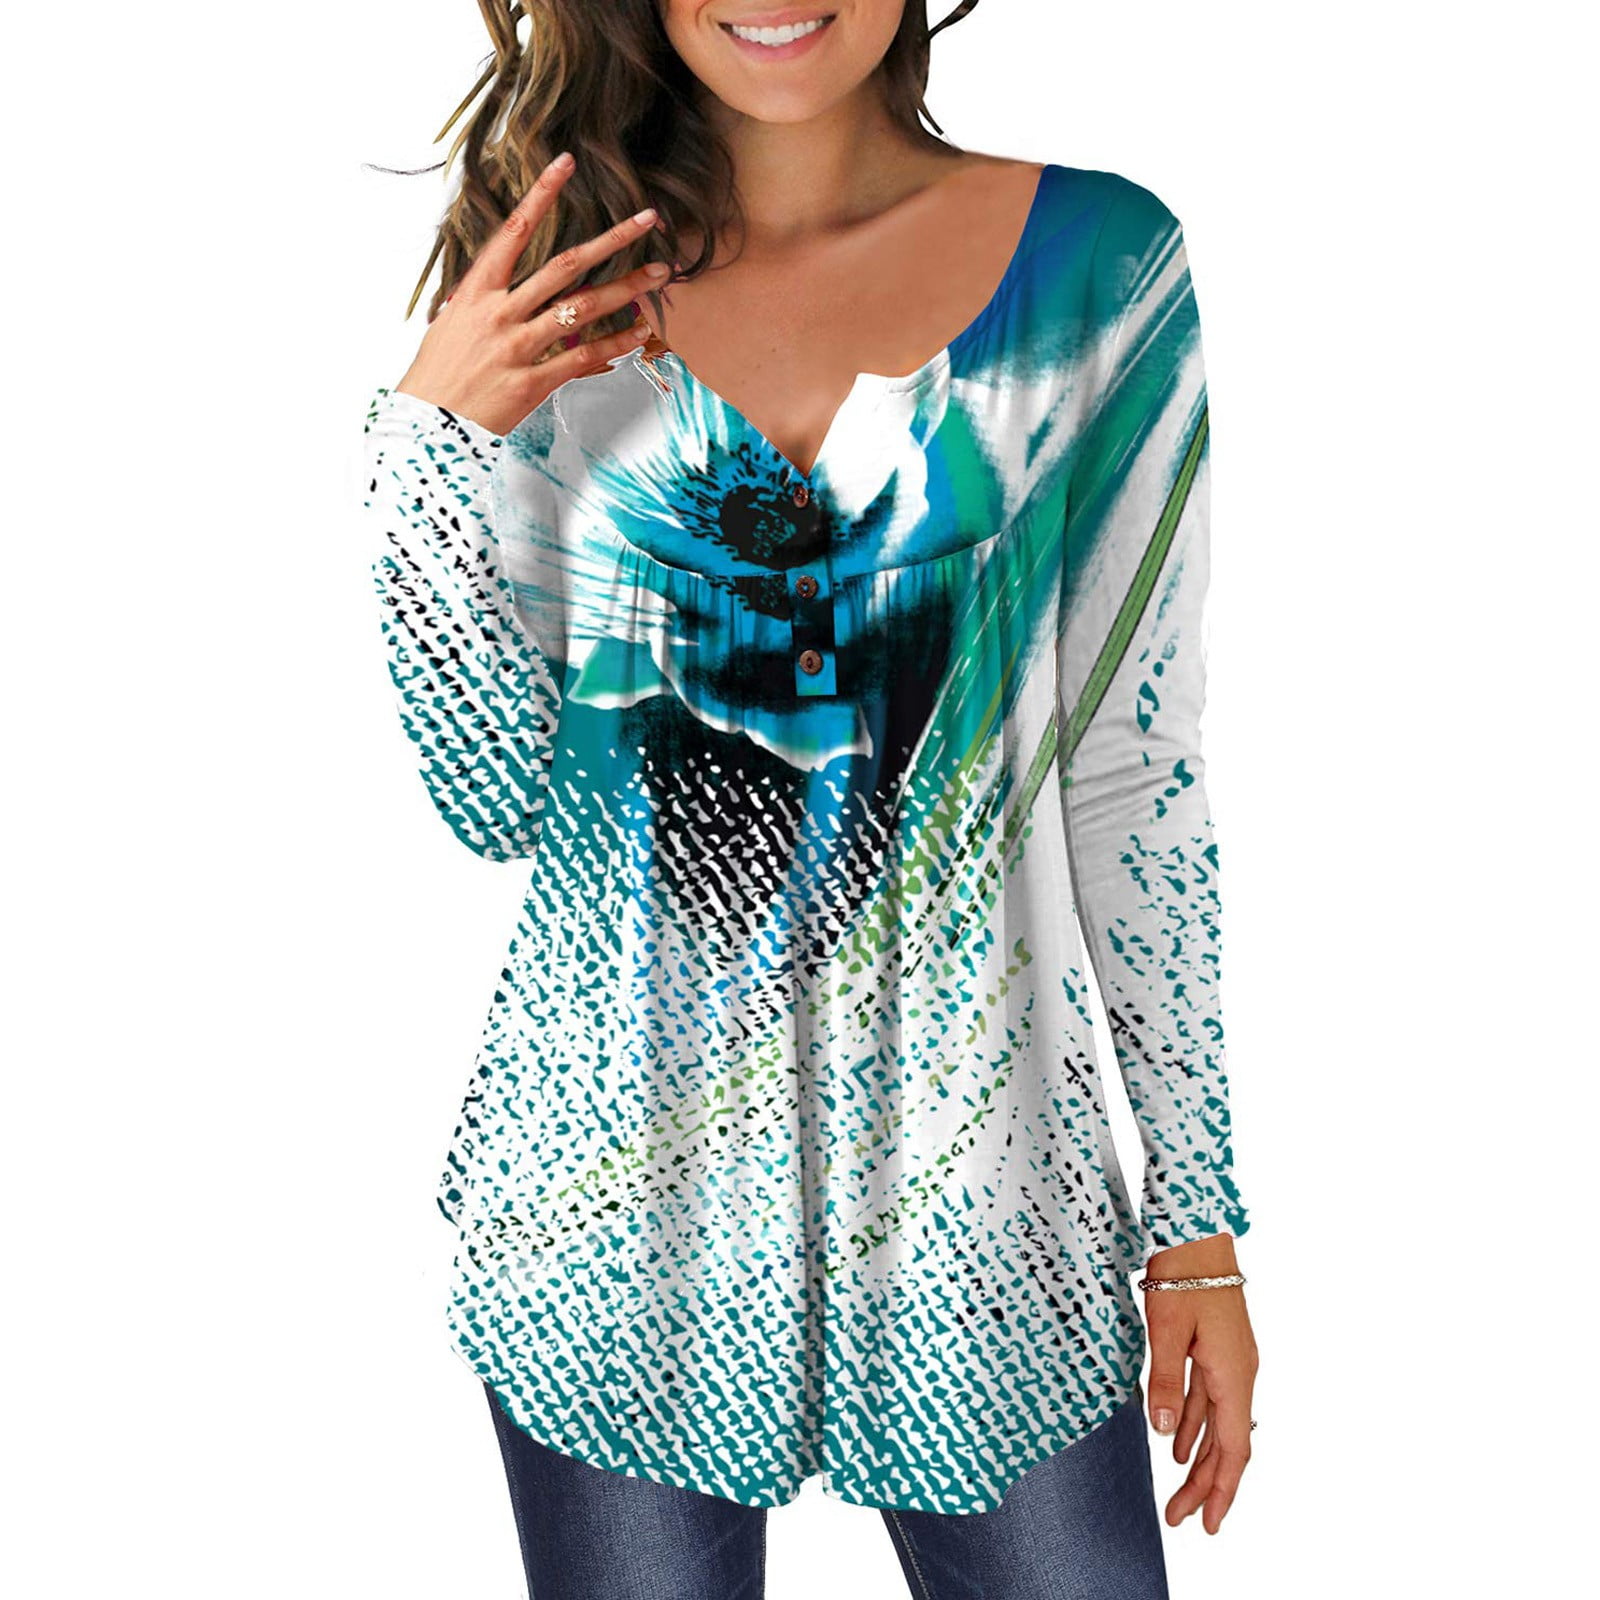 Long Sleeve Tops For Women, Plus Size Tops Tops Plain T Shirts Women's Round Neck Printed Buttons Asymmetric Hem Top Under 10 Dollars Prime Casual Tops White (S, Green)